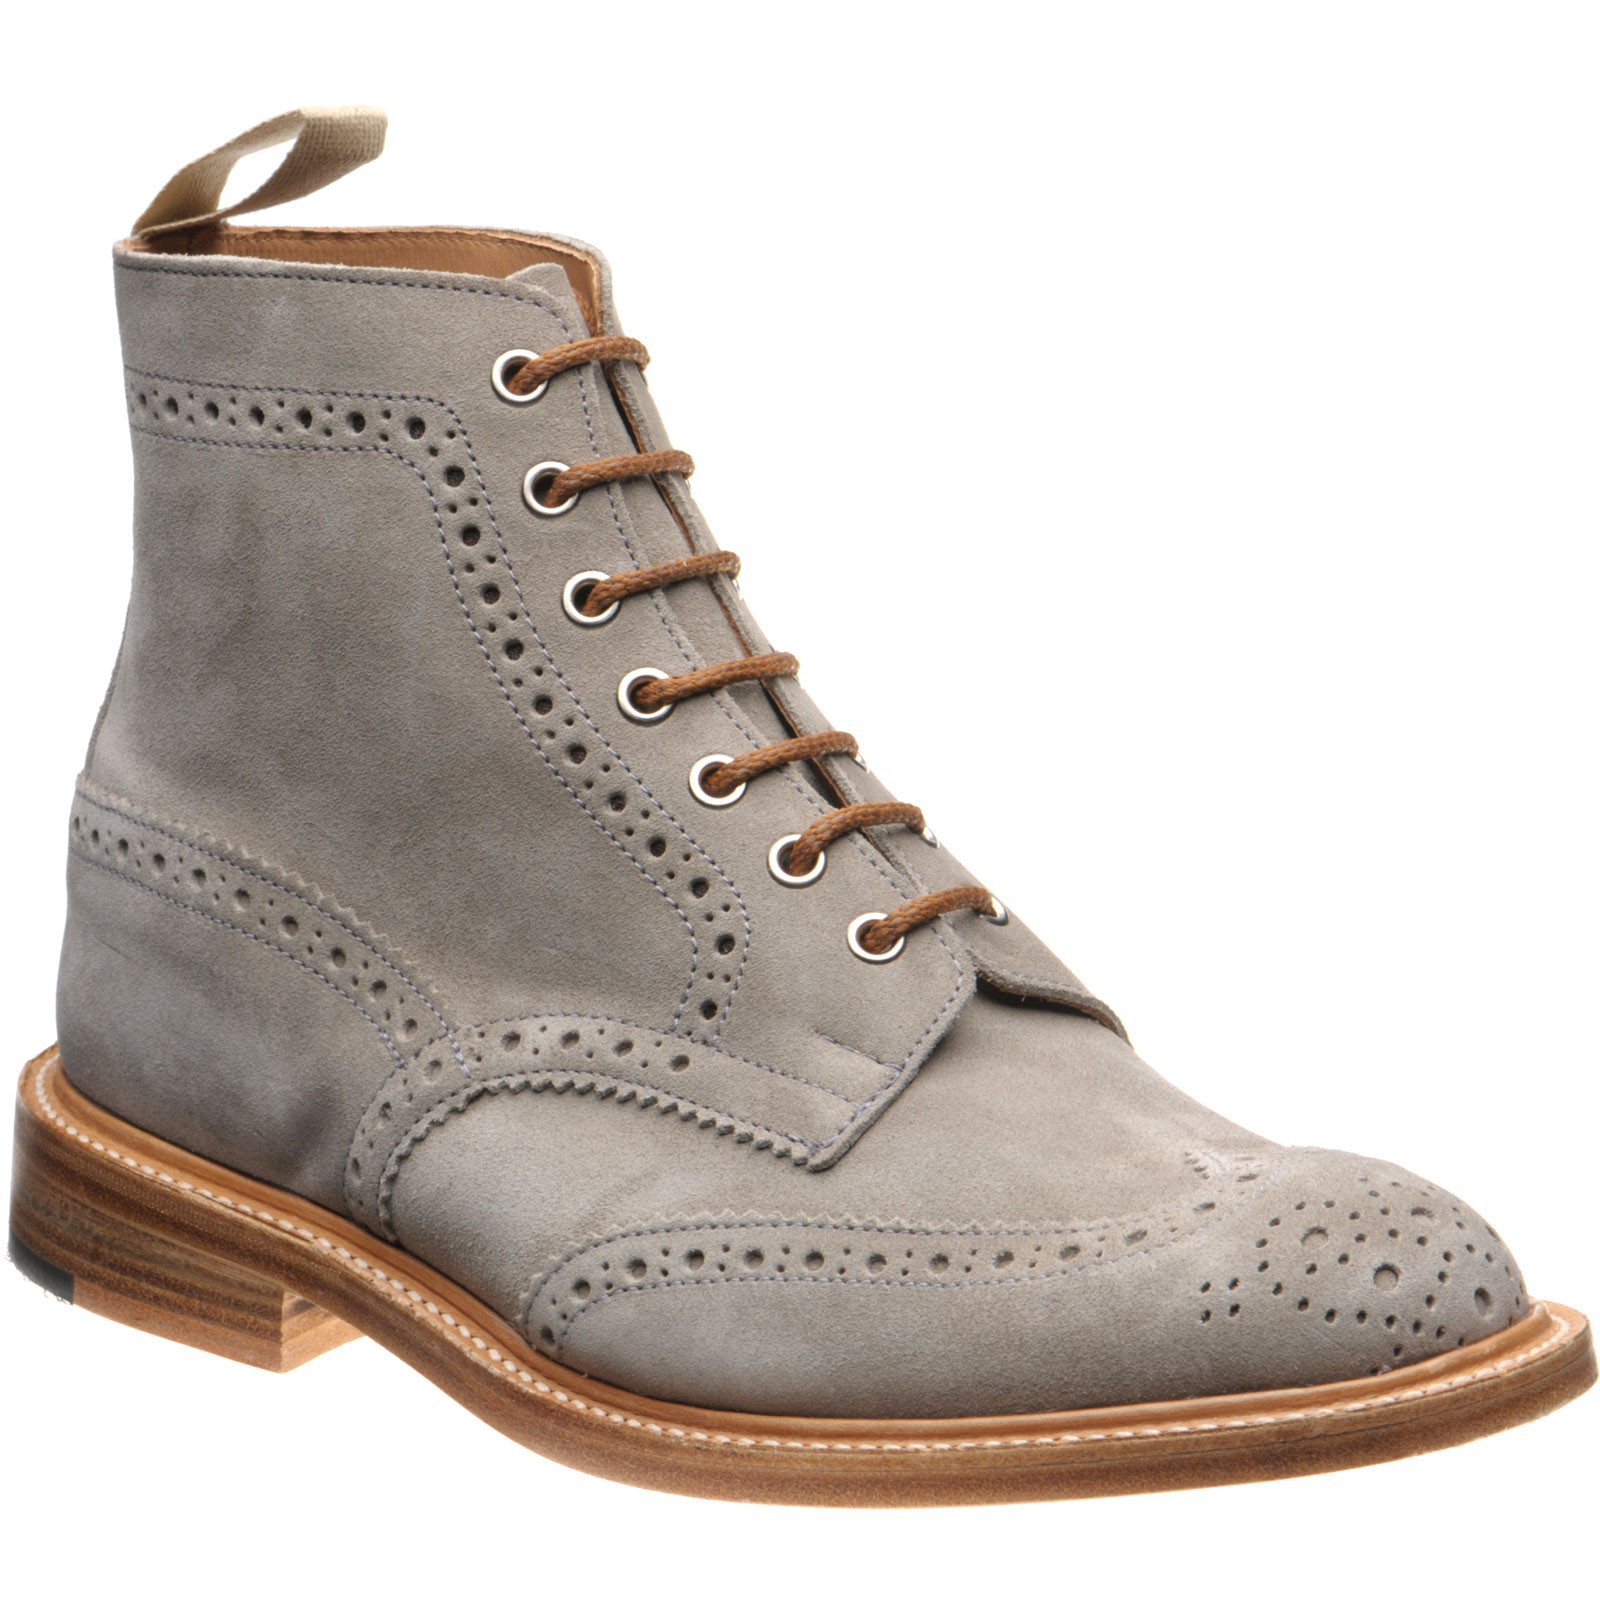 Trickers shoes | Trickers Sale | Stow in Shale Suede at Herring Shoes